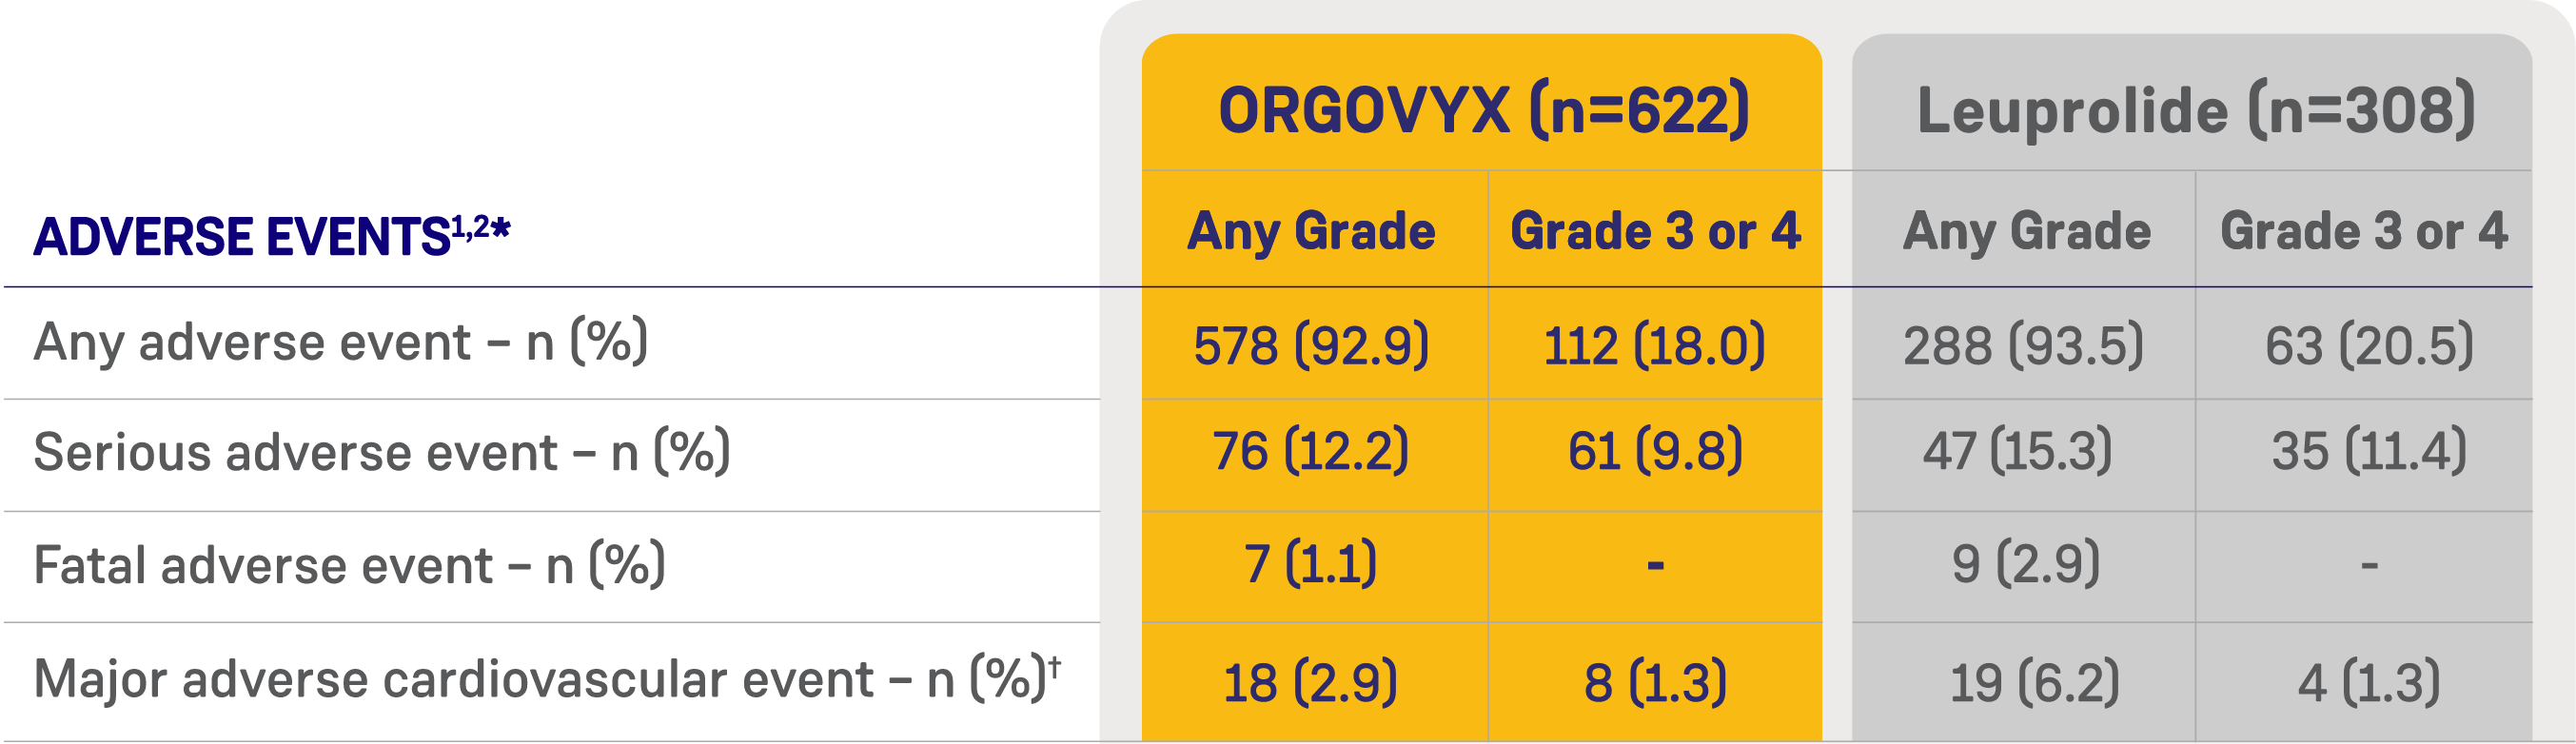 Table showing serious adverse events seen with ORGOVYX and leuprolide in the ORGOVYX USPI